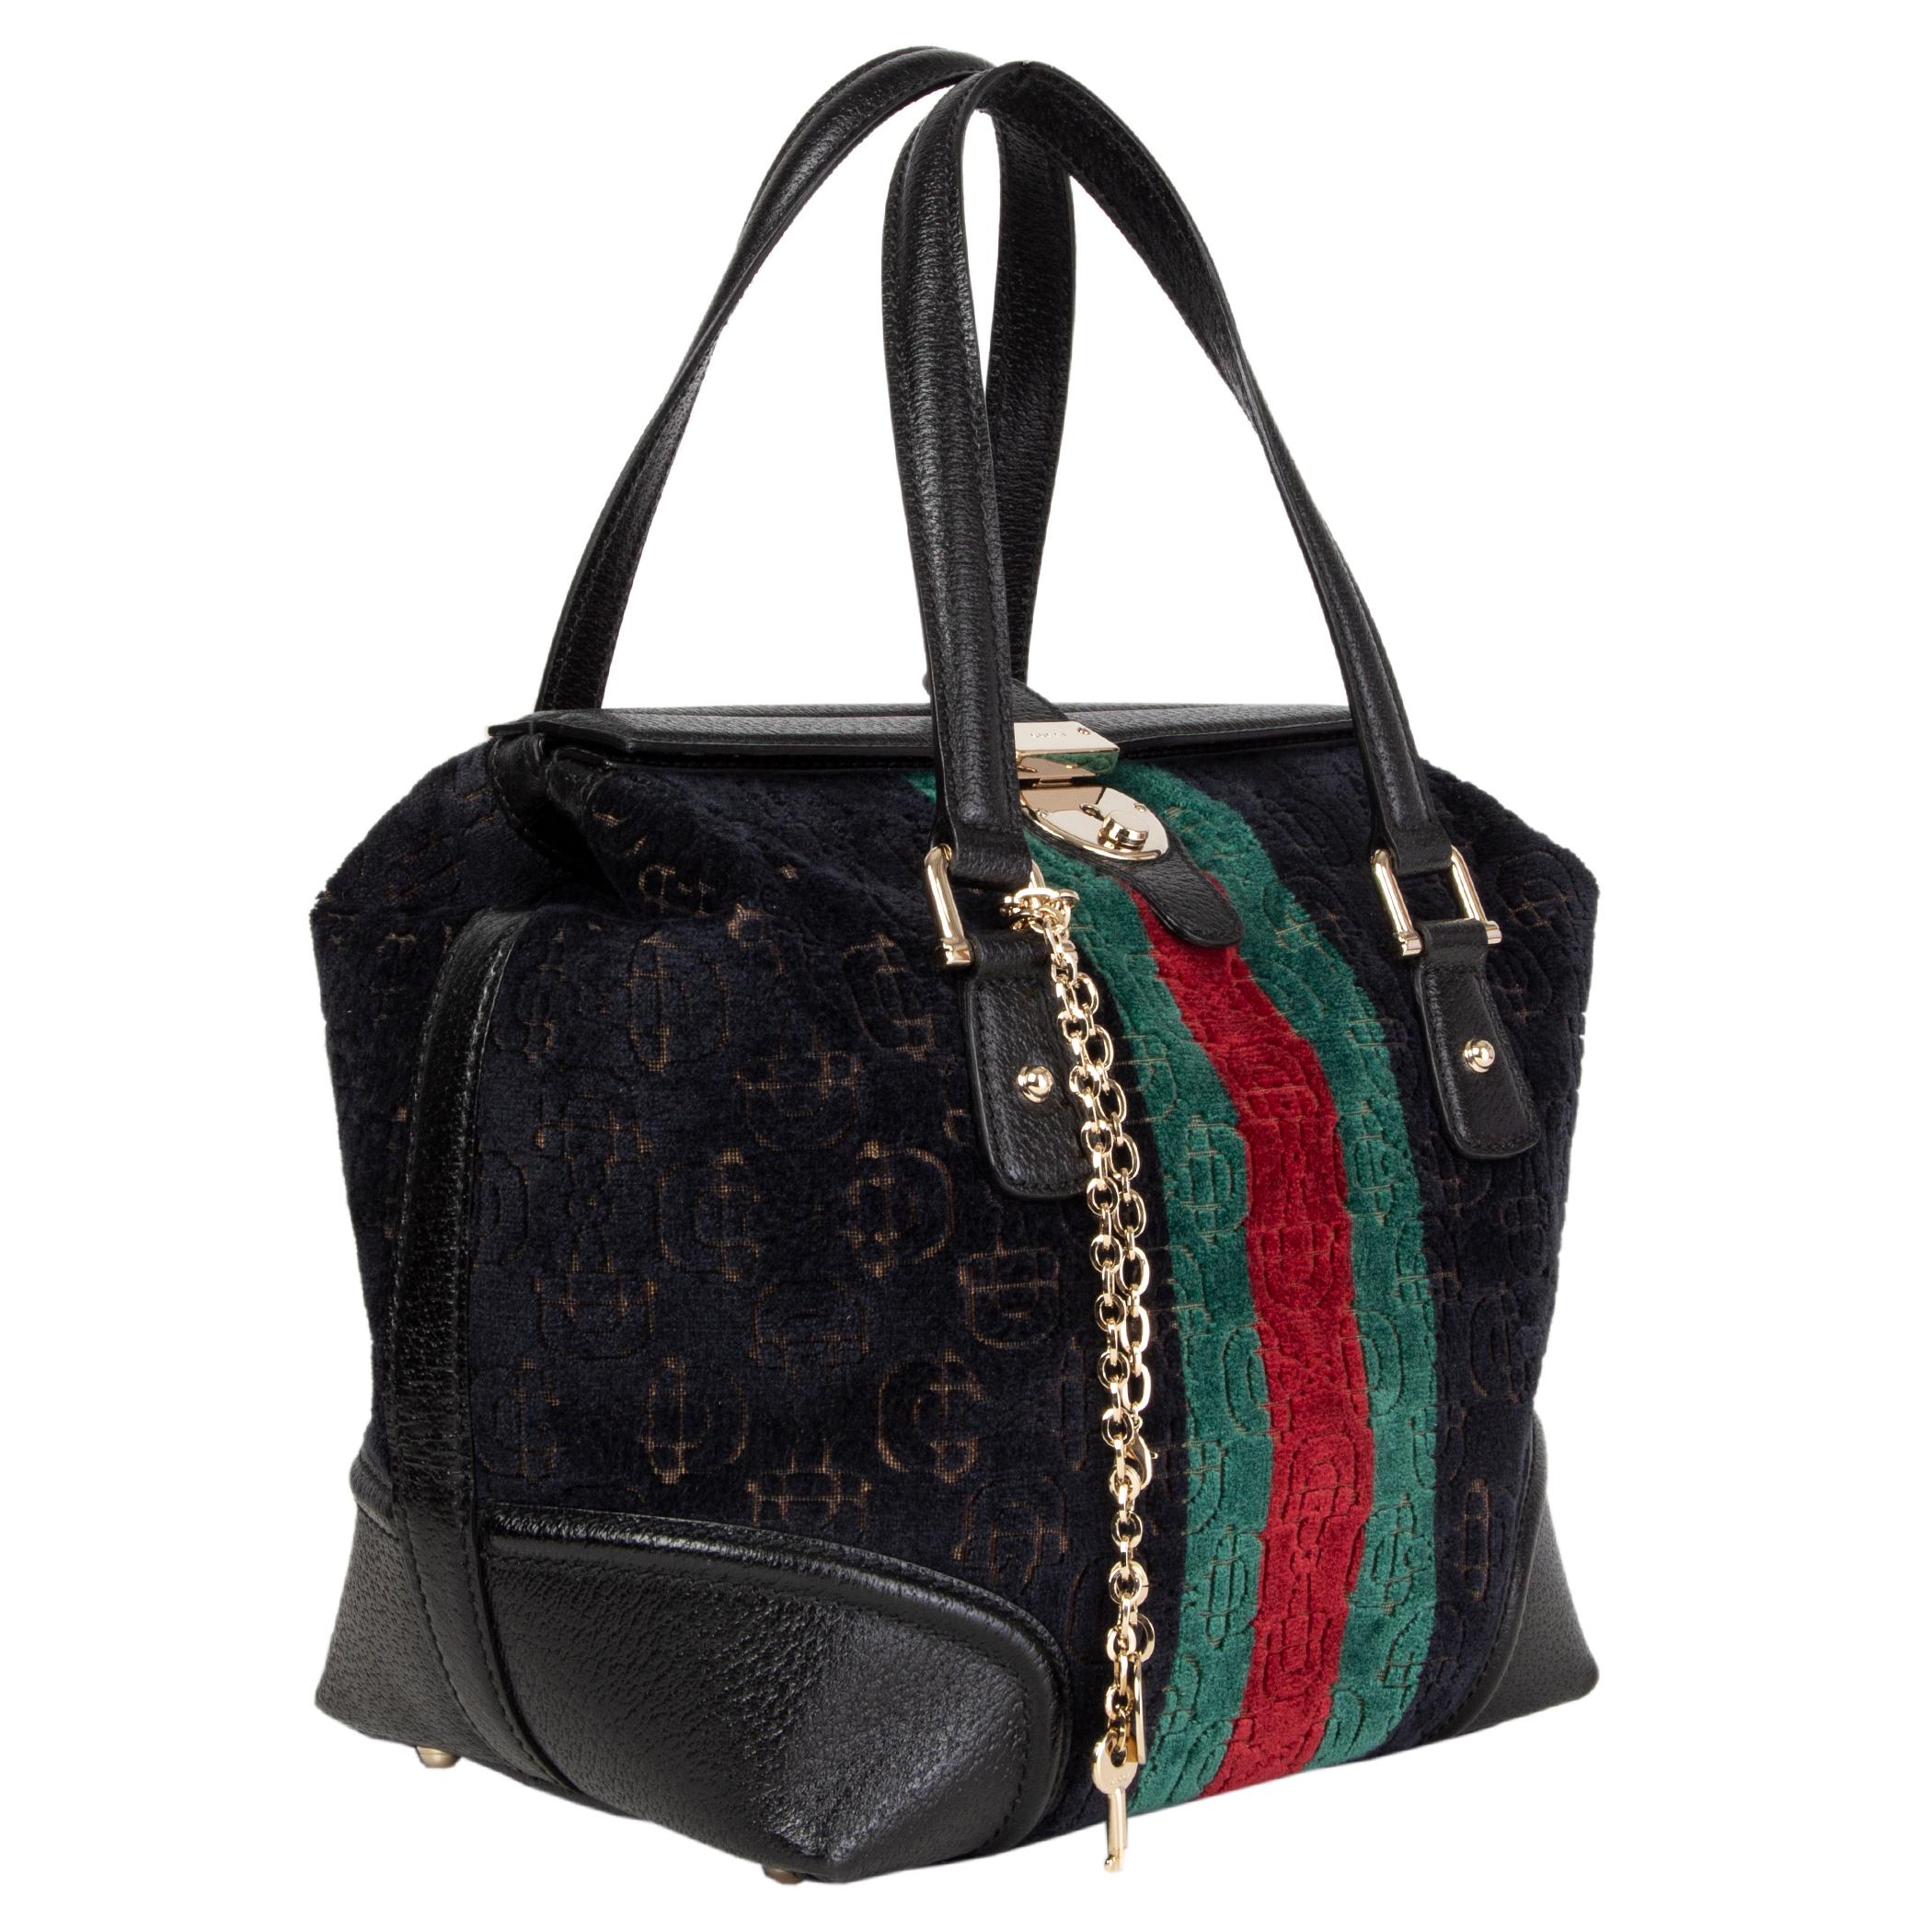 Gucci 'Horsebit Treasure Small Boston' bag in midnight blue velvet with green-red stripe and details in black leather. Closes with a lock on top. Lined in black cotton with a zipper pocket against the back. Has been carried and is in excellent